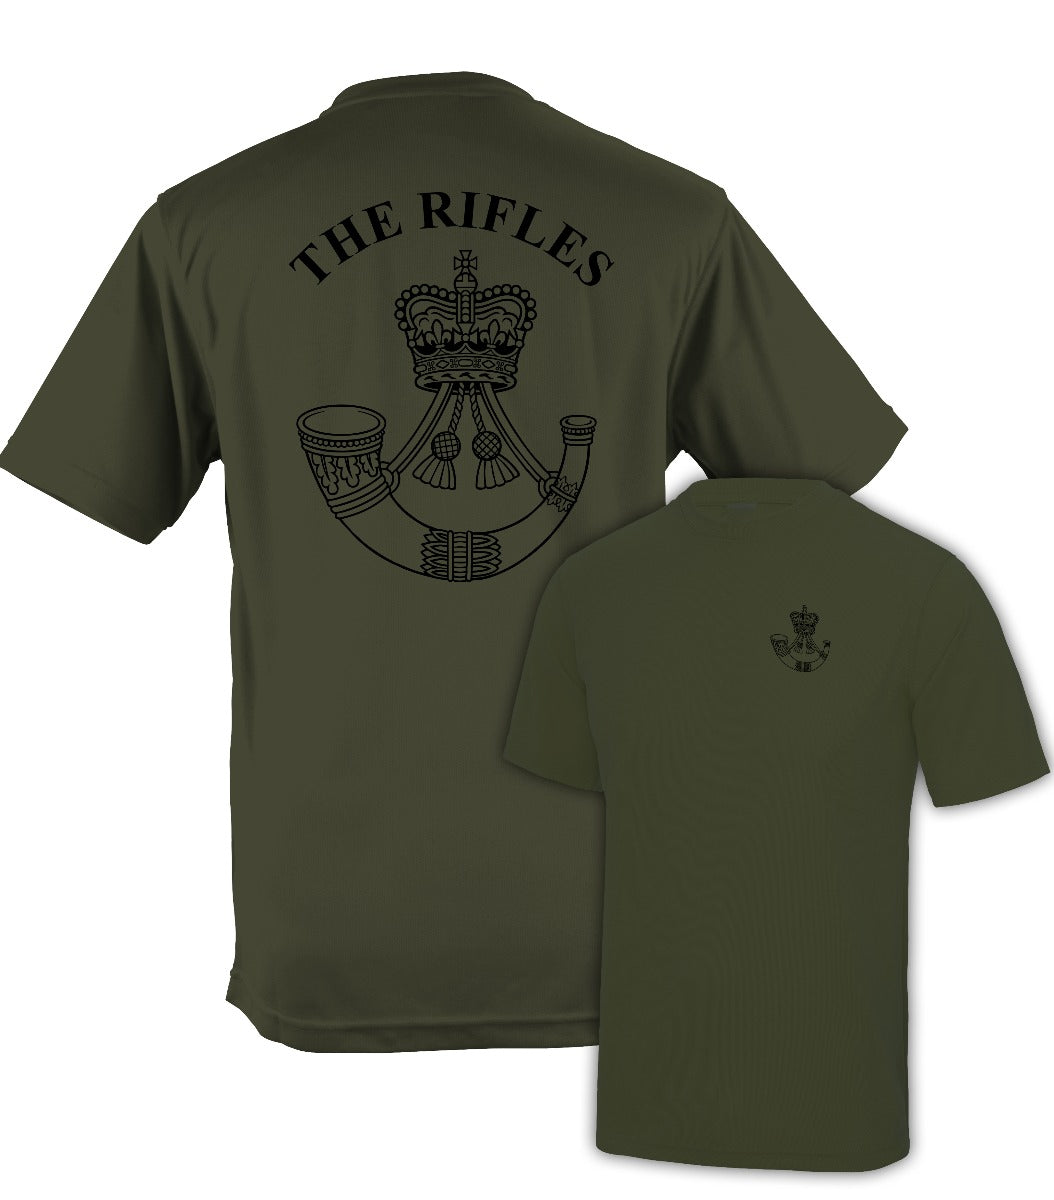 Fully Printed The Rifles Wicking Fabric T-shirt